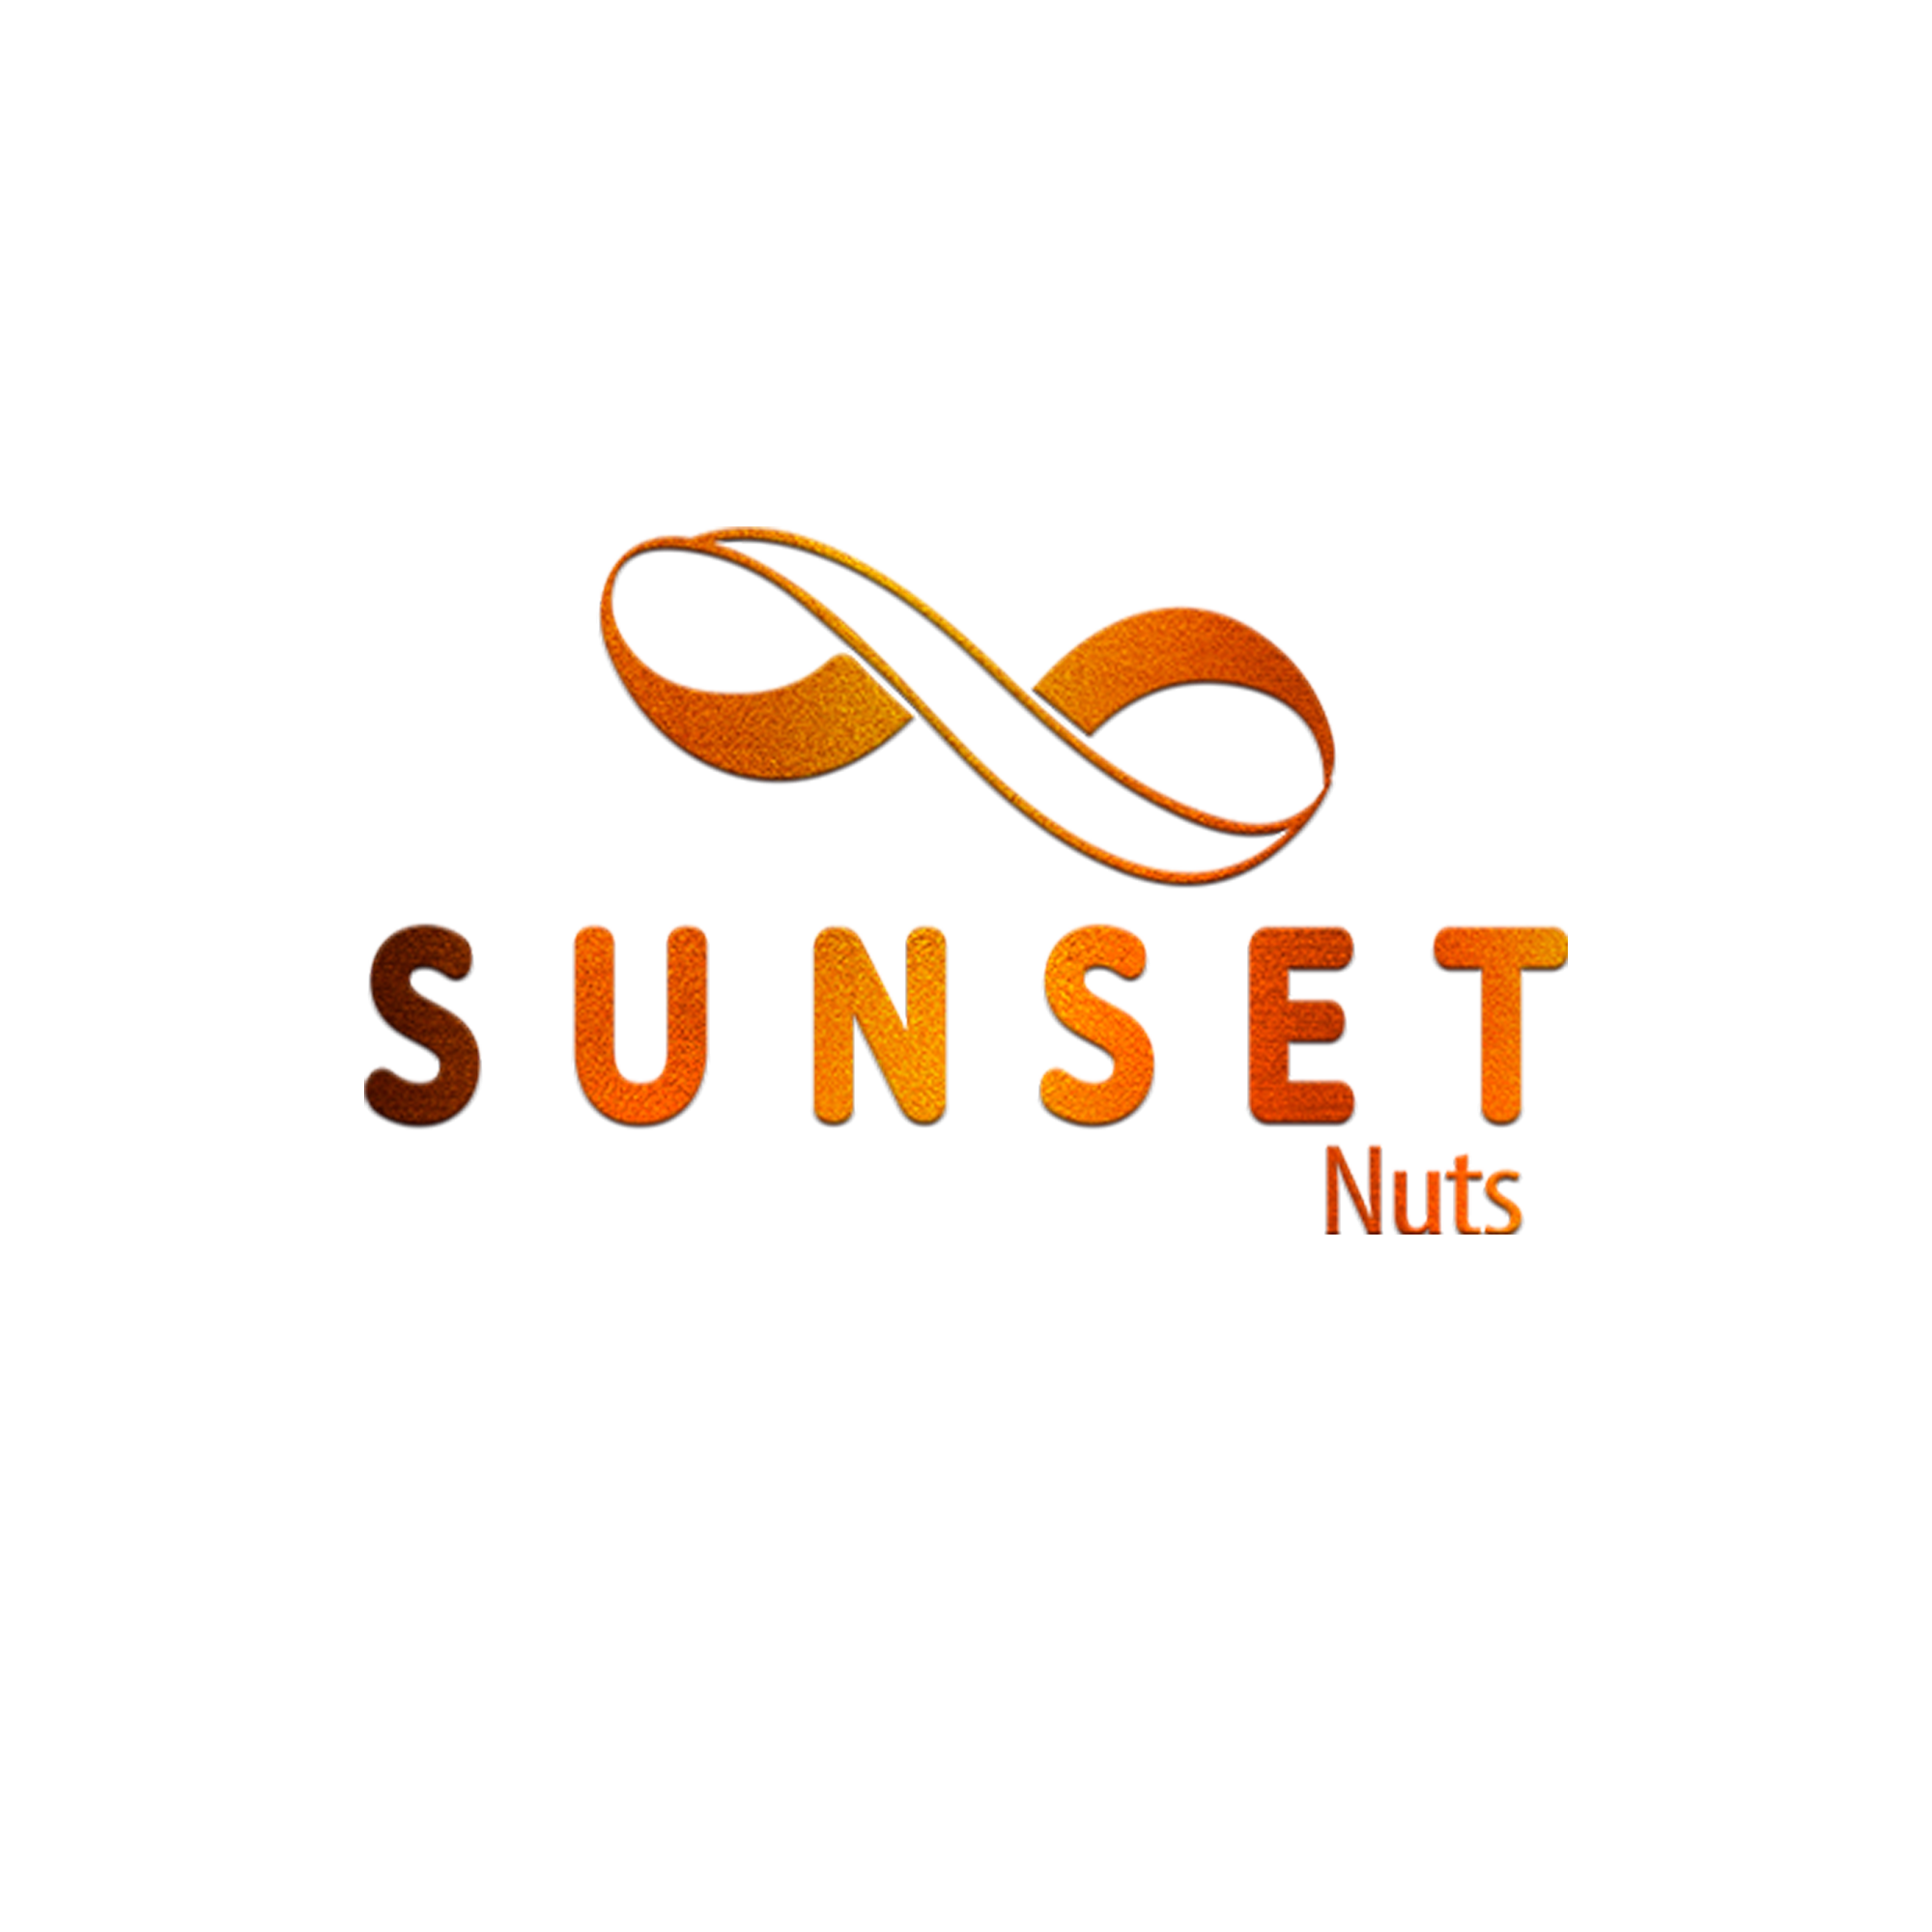 SUNSET NUTS